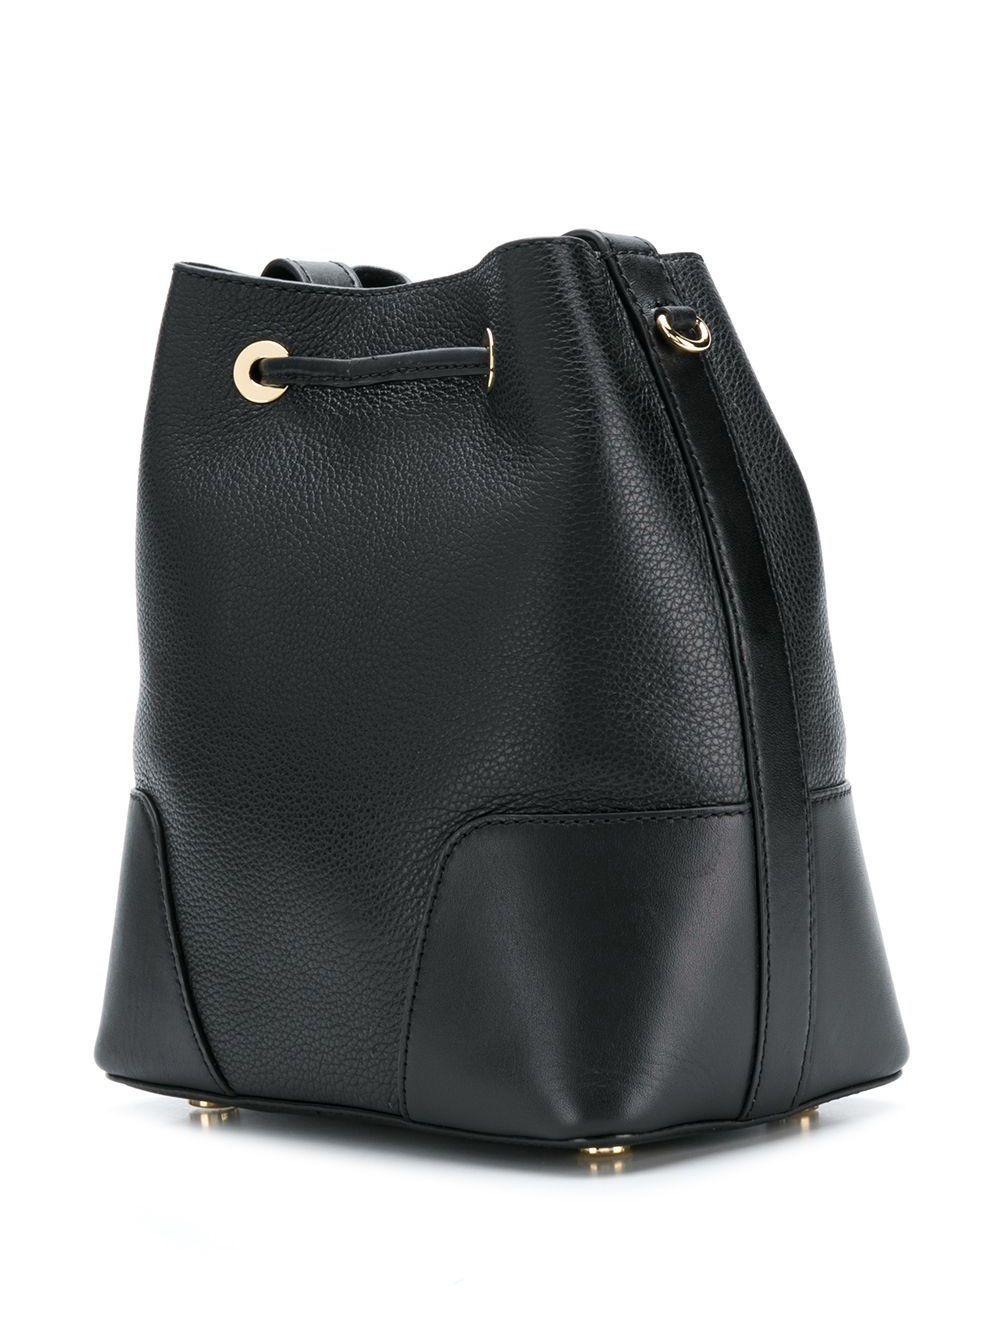 MICHAEL Michael Kors Leather Cary Small Bucket Bag in Black - Lyst